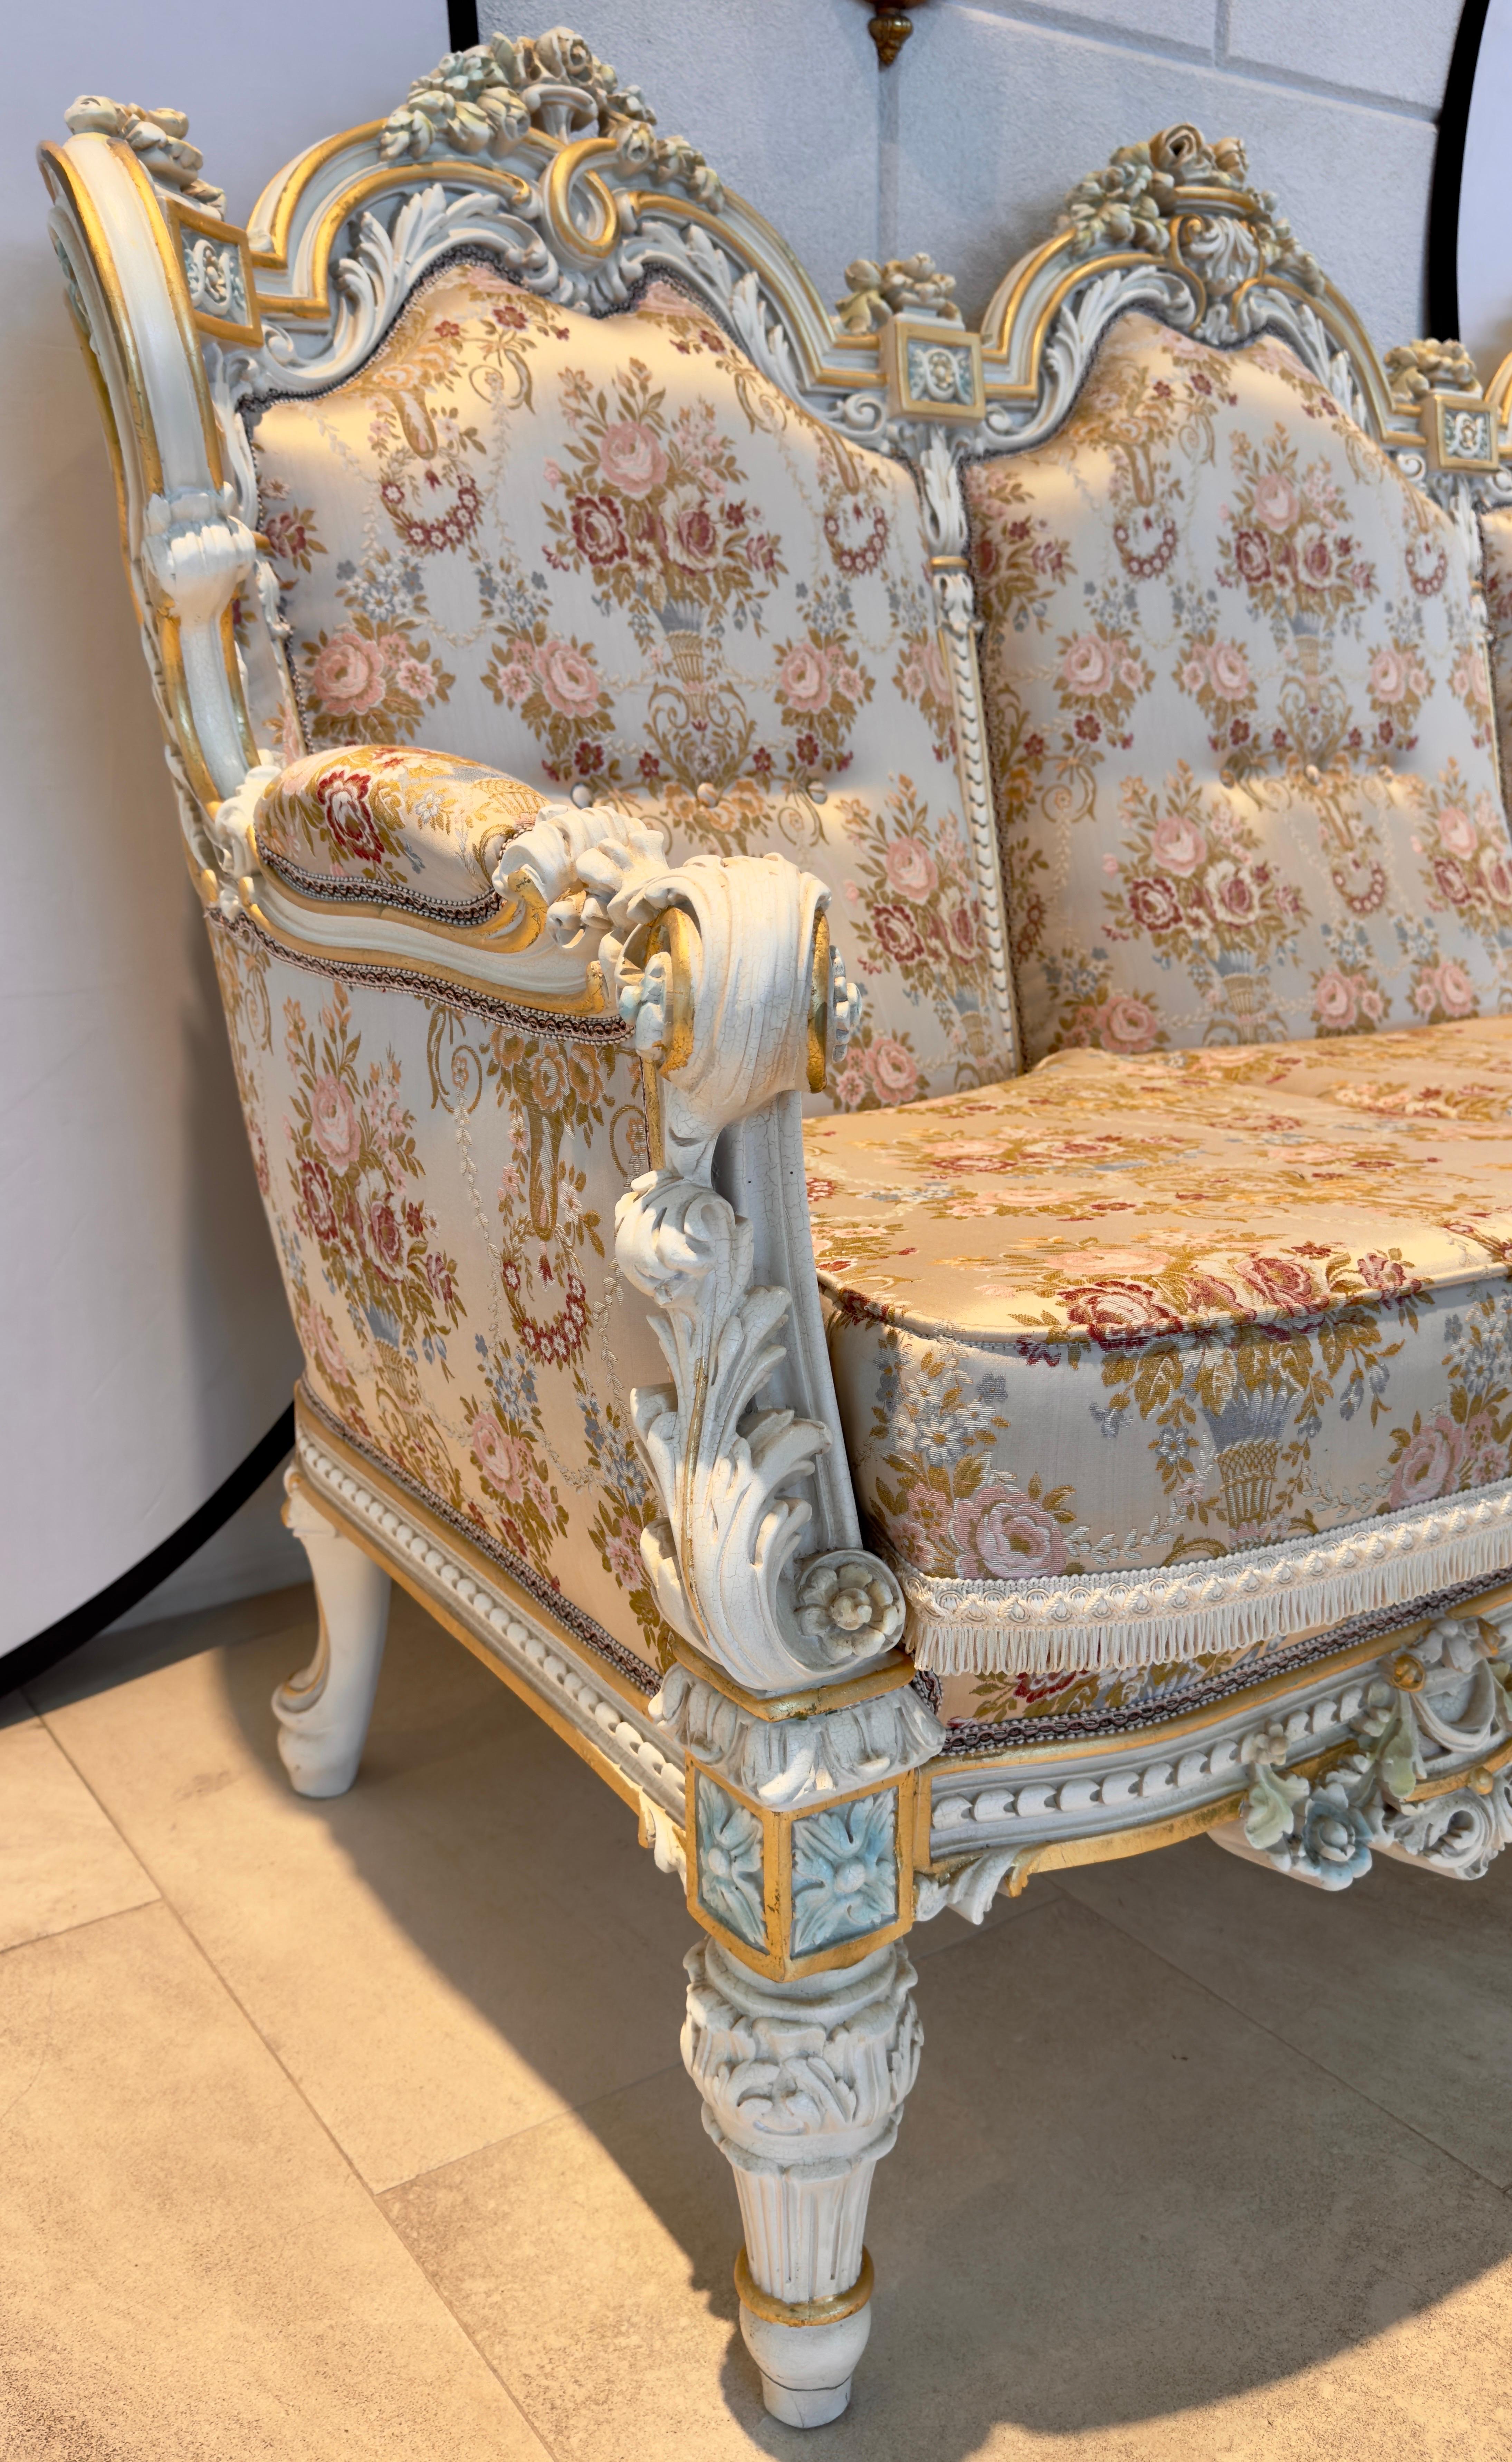 20th Century Italian Neoclassical Baroque Style Sofa with fine floral silk upholstery  For Sale